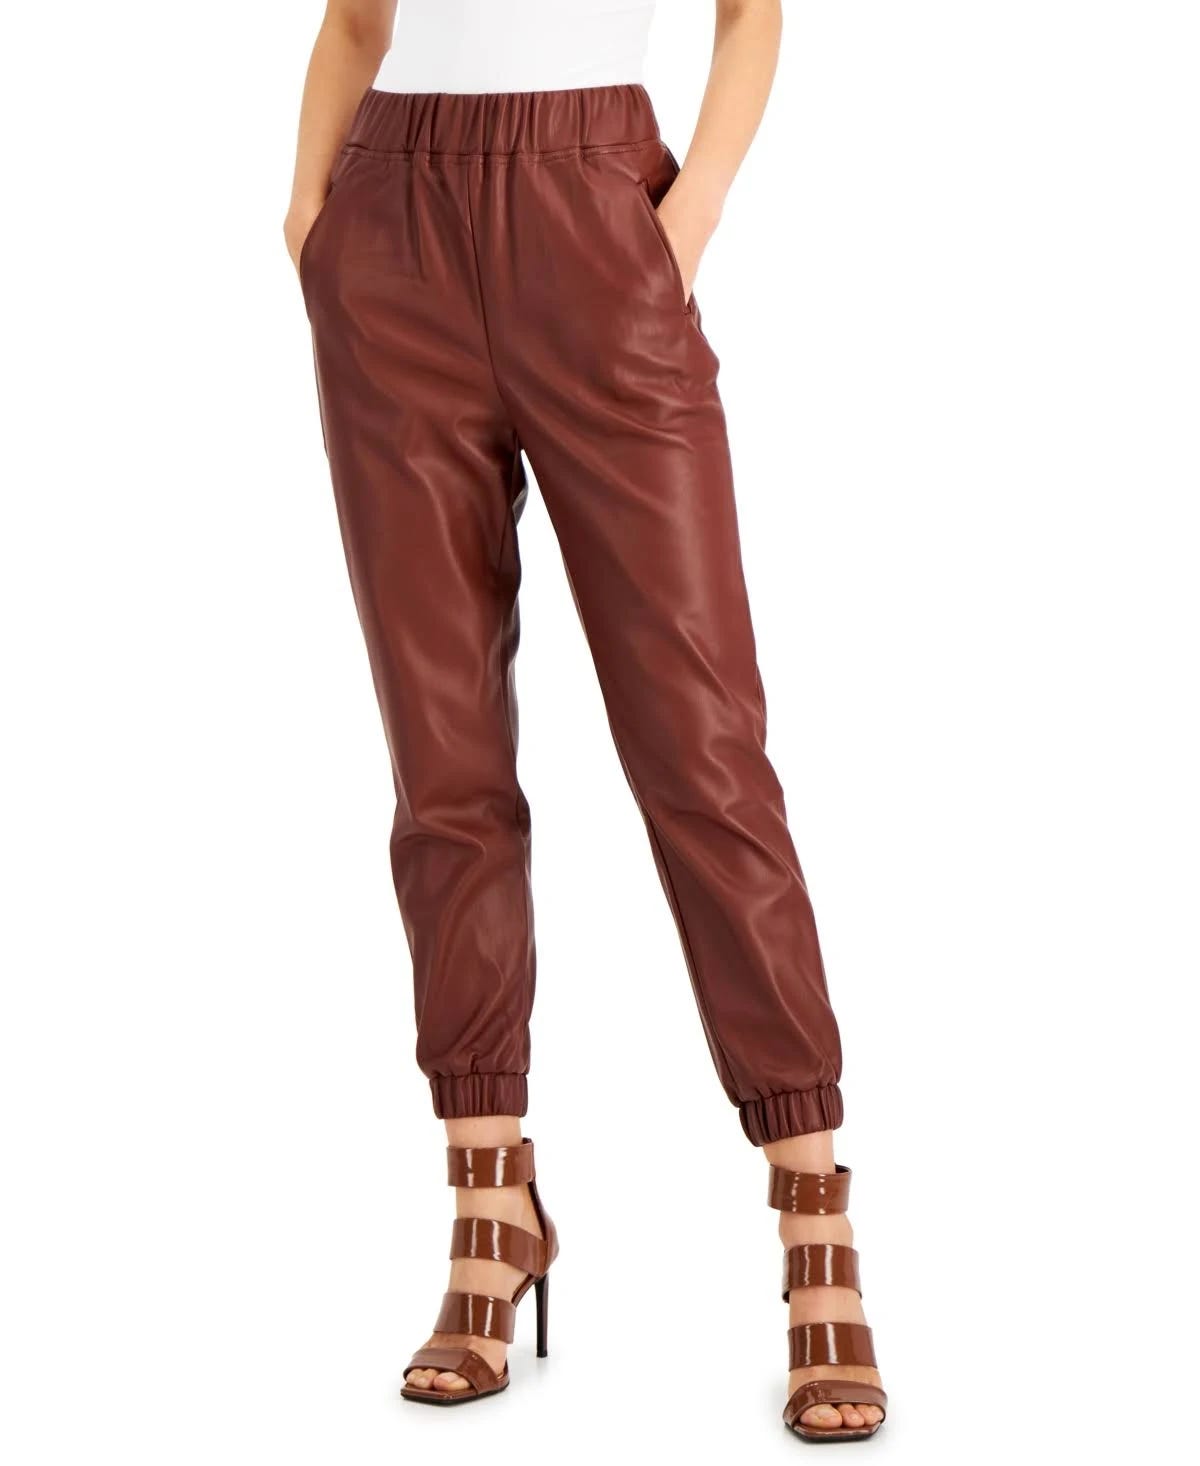 Comfortable High-Rise Joggers for Women - Deep Sienna Color | Image